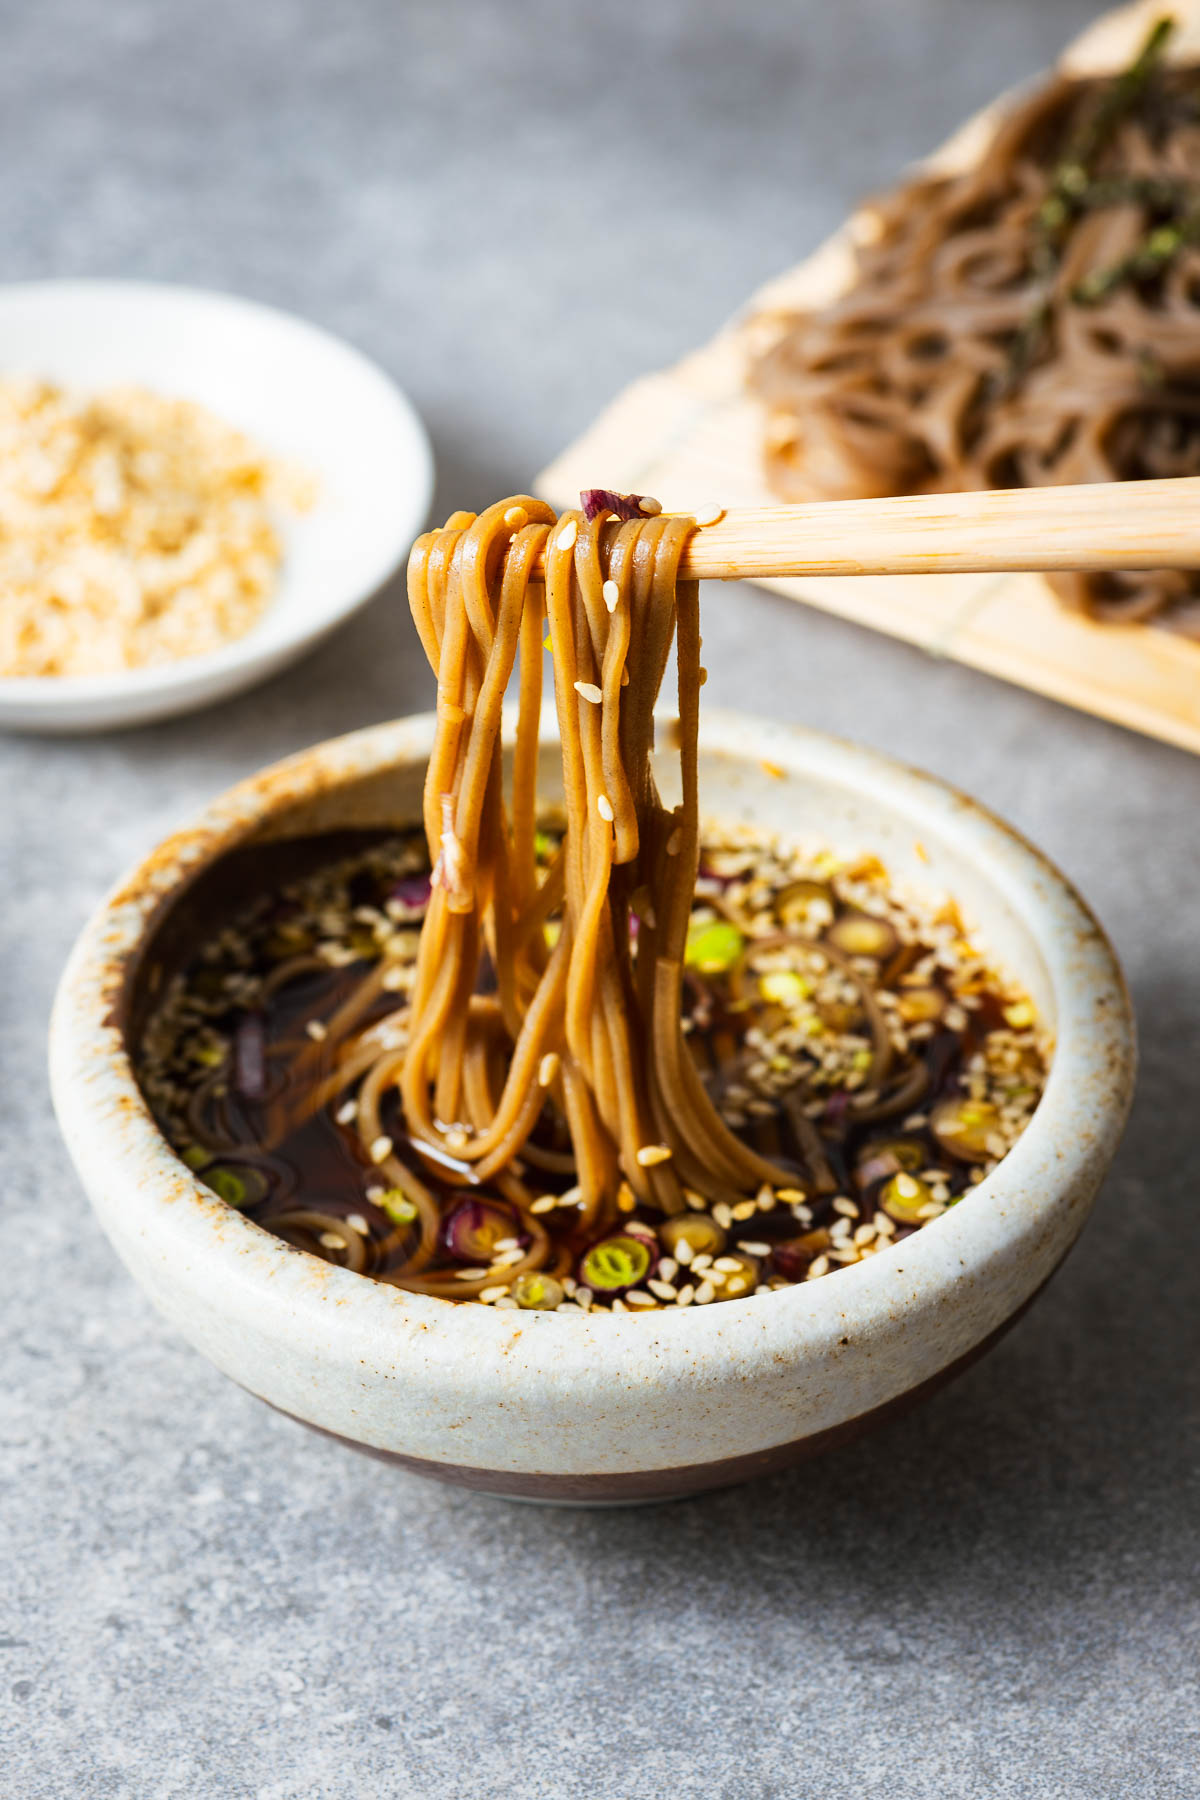 Cold Soba Noodles With Dipping Sauce (Zaru Soba)